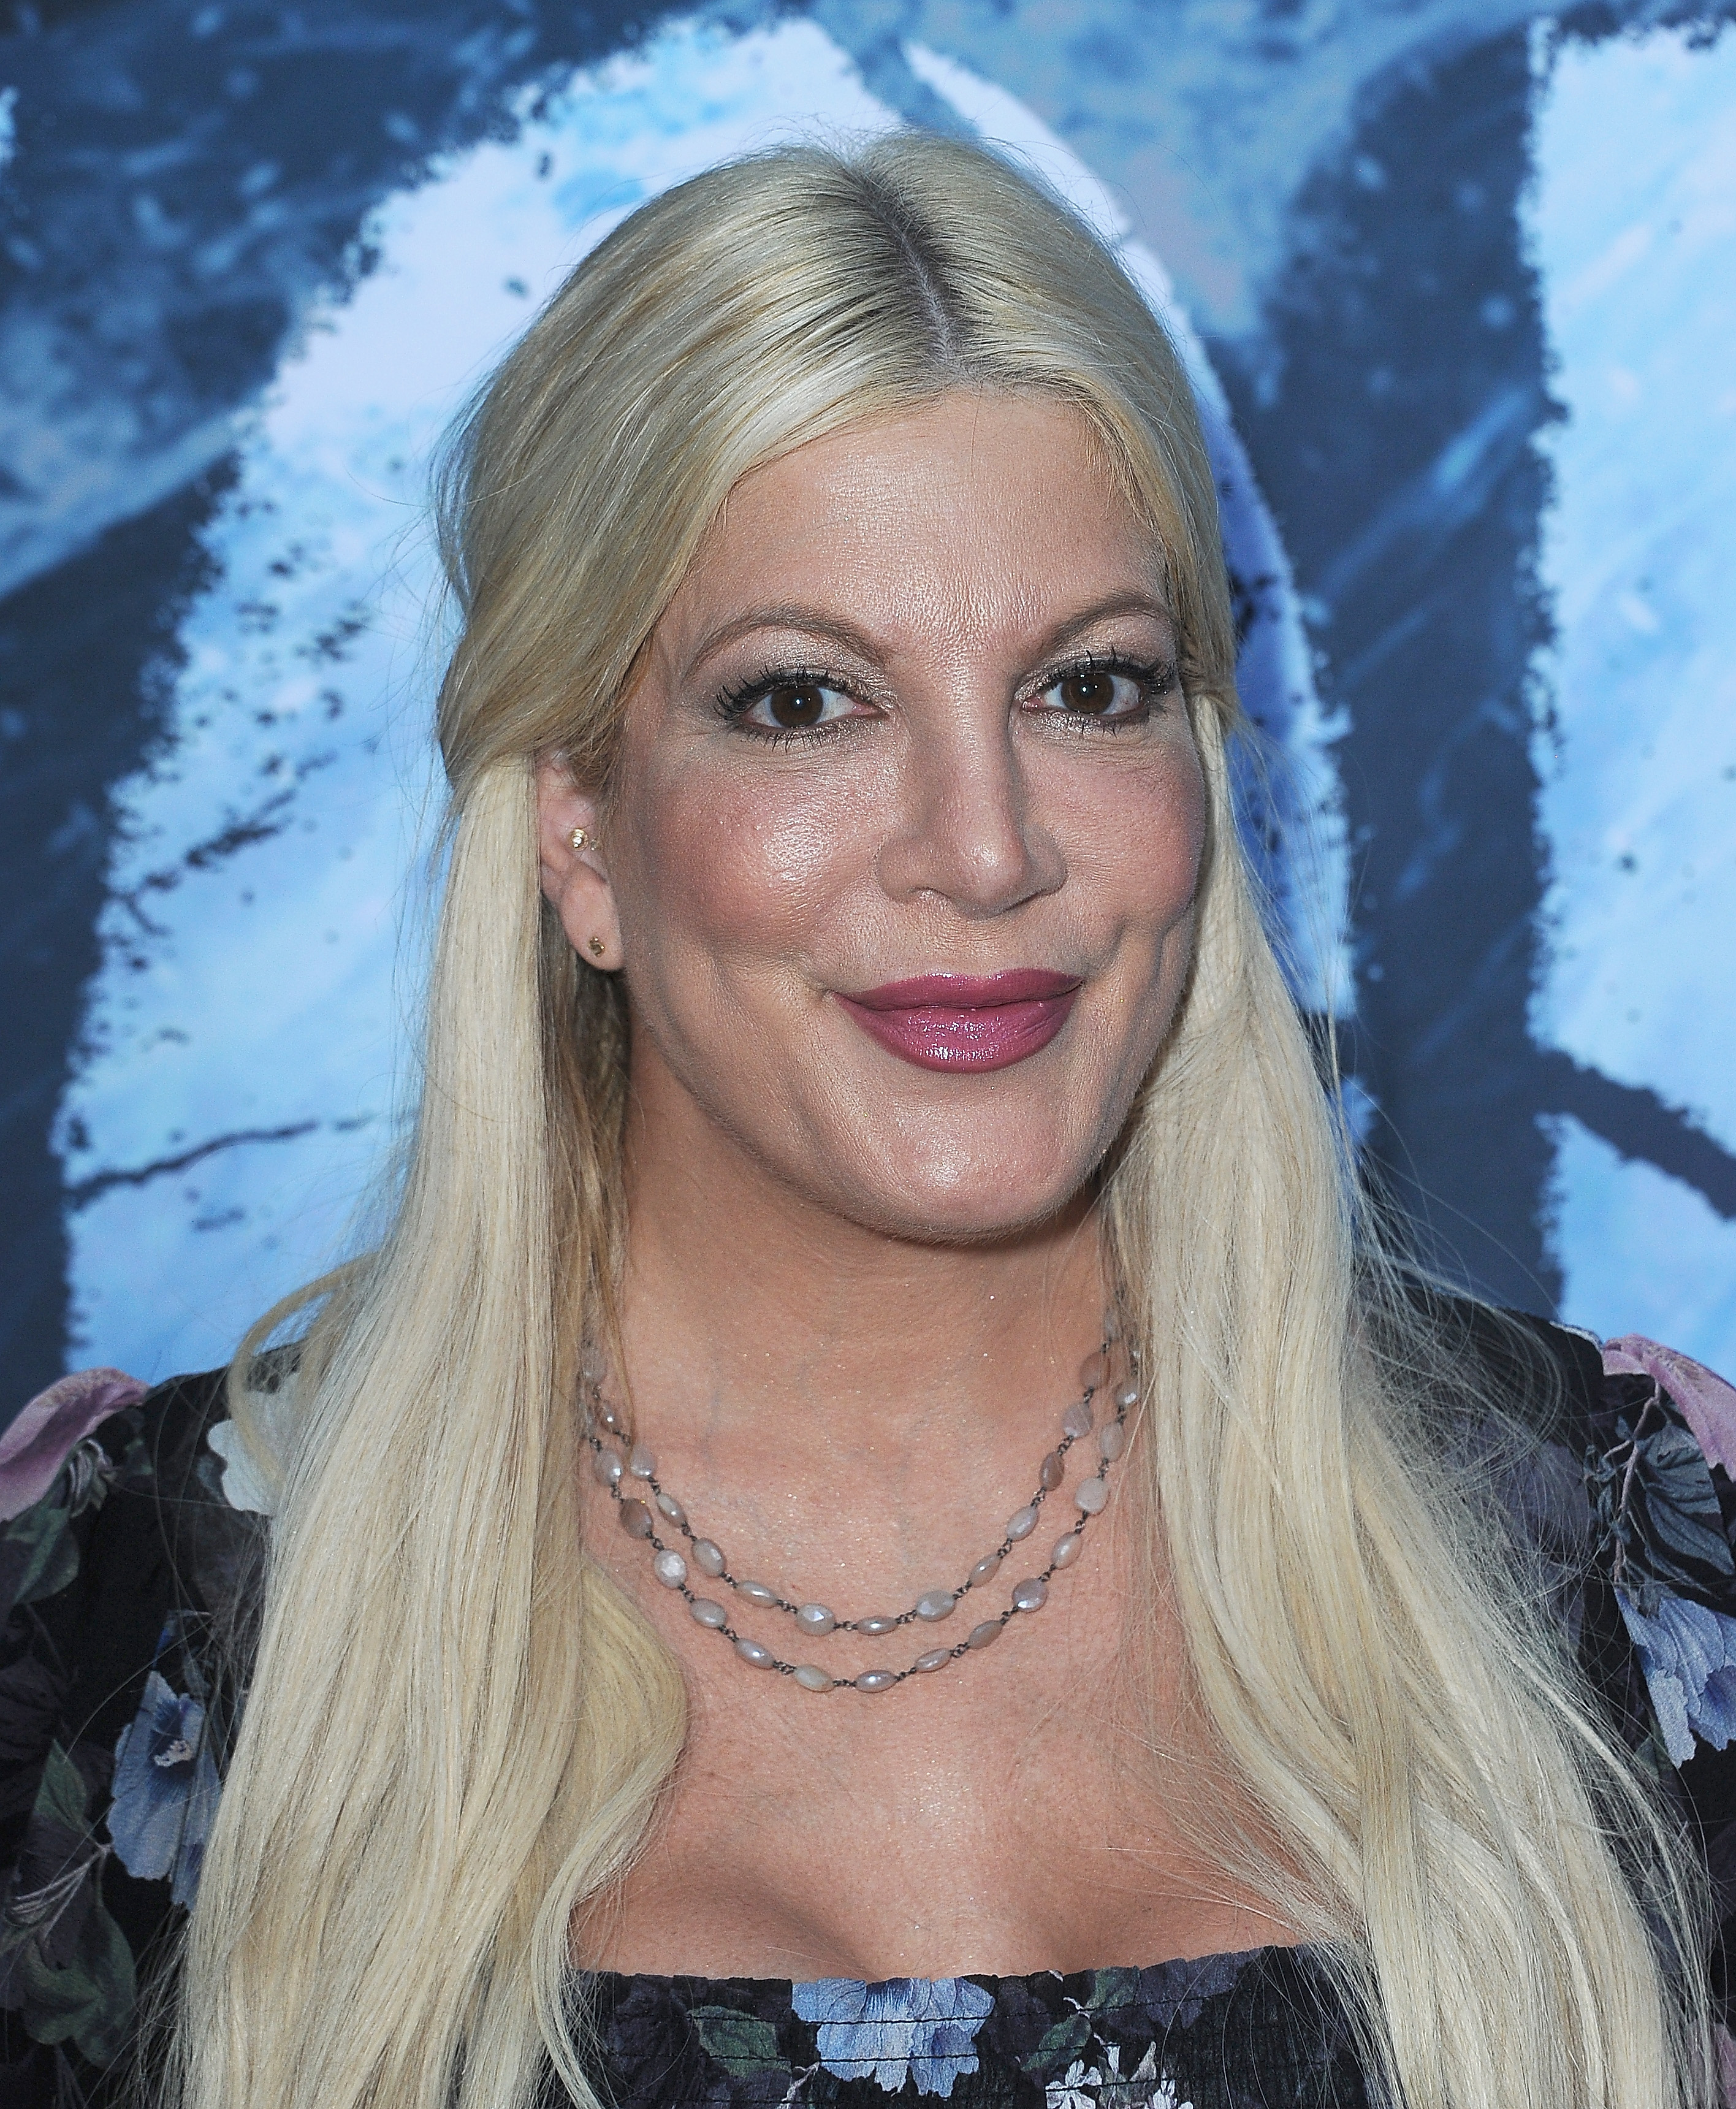 Tori Spelling arrives for the Premiere Of SyFy's "Zombie Tidal Wave" held in North Hollywood, California, on August 12, 2019. | Source: Getty Images